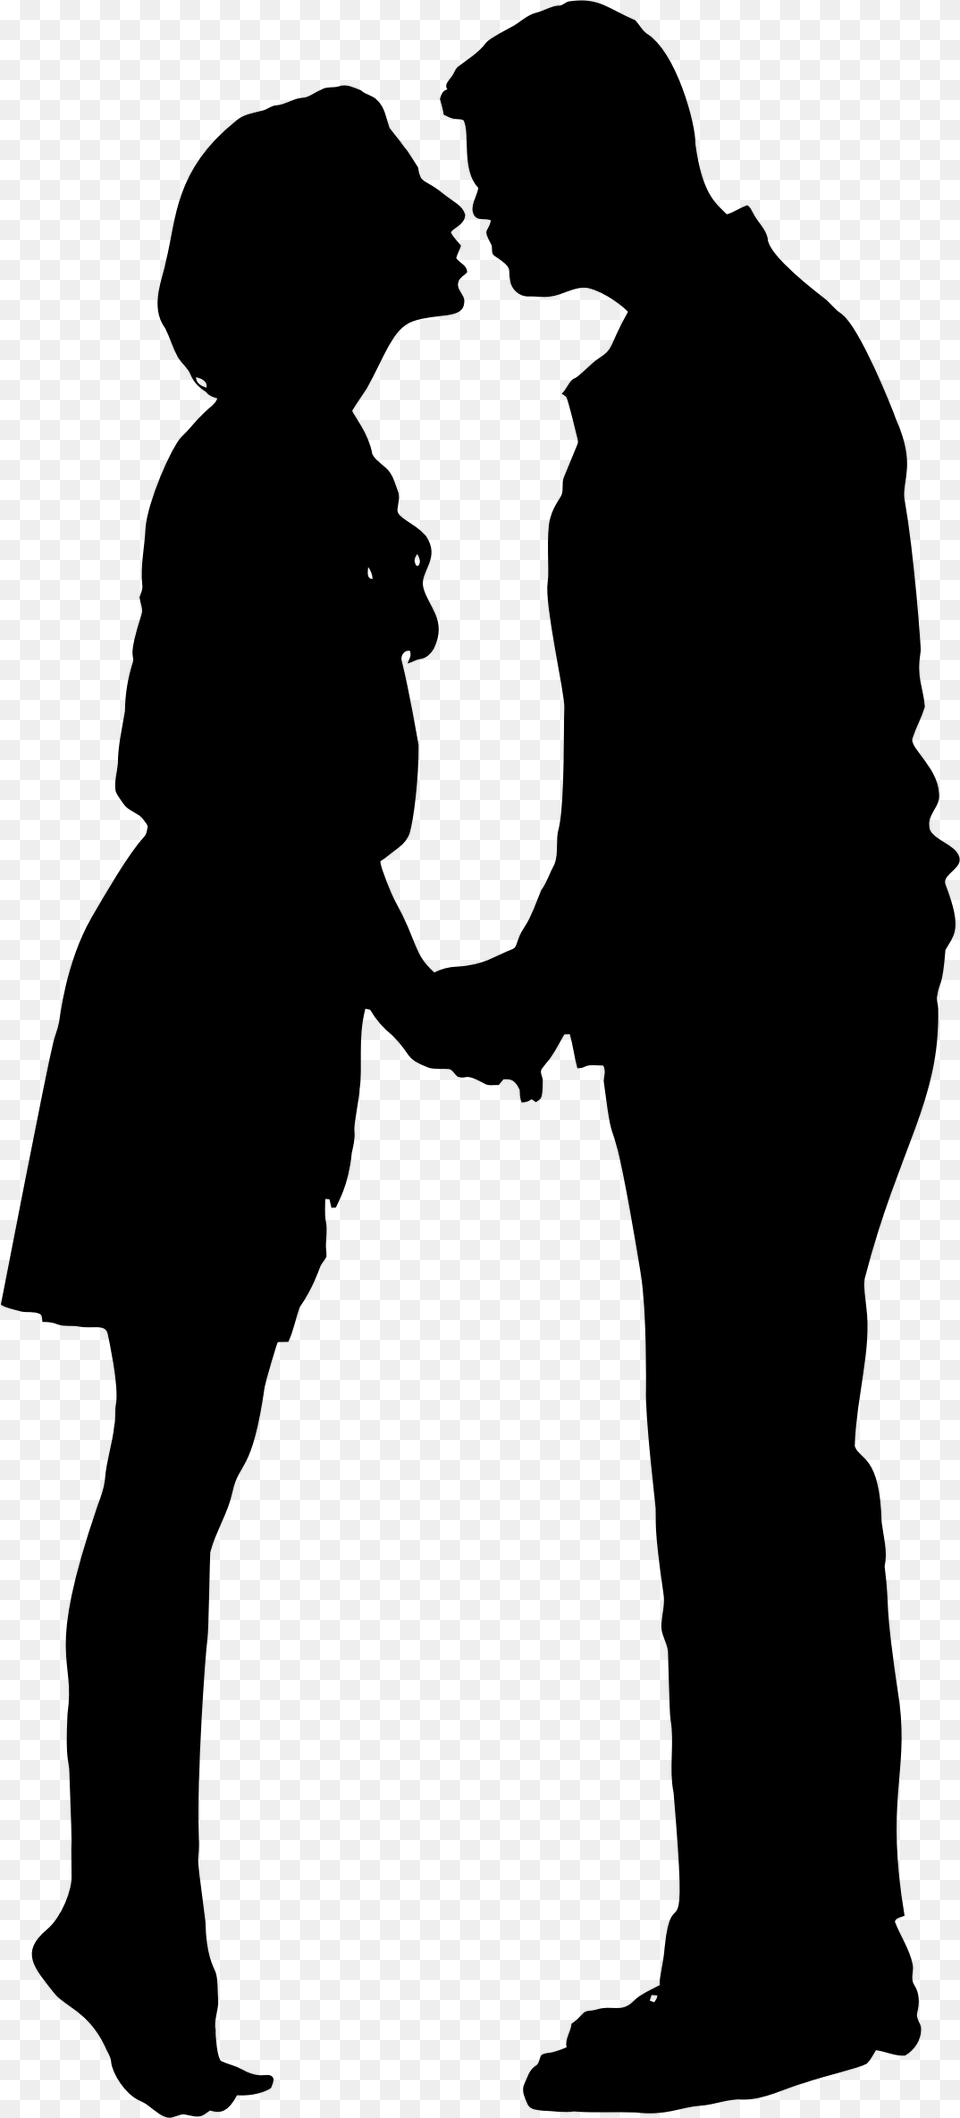 Love Silhouette Couple Love Man And Woman Silhouette, Gray Png Image